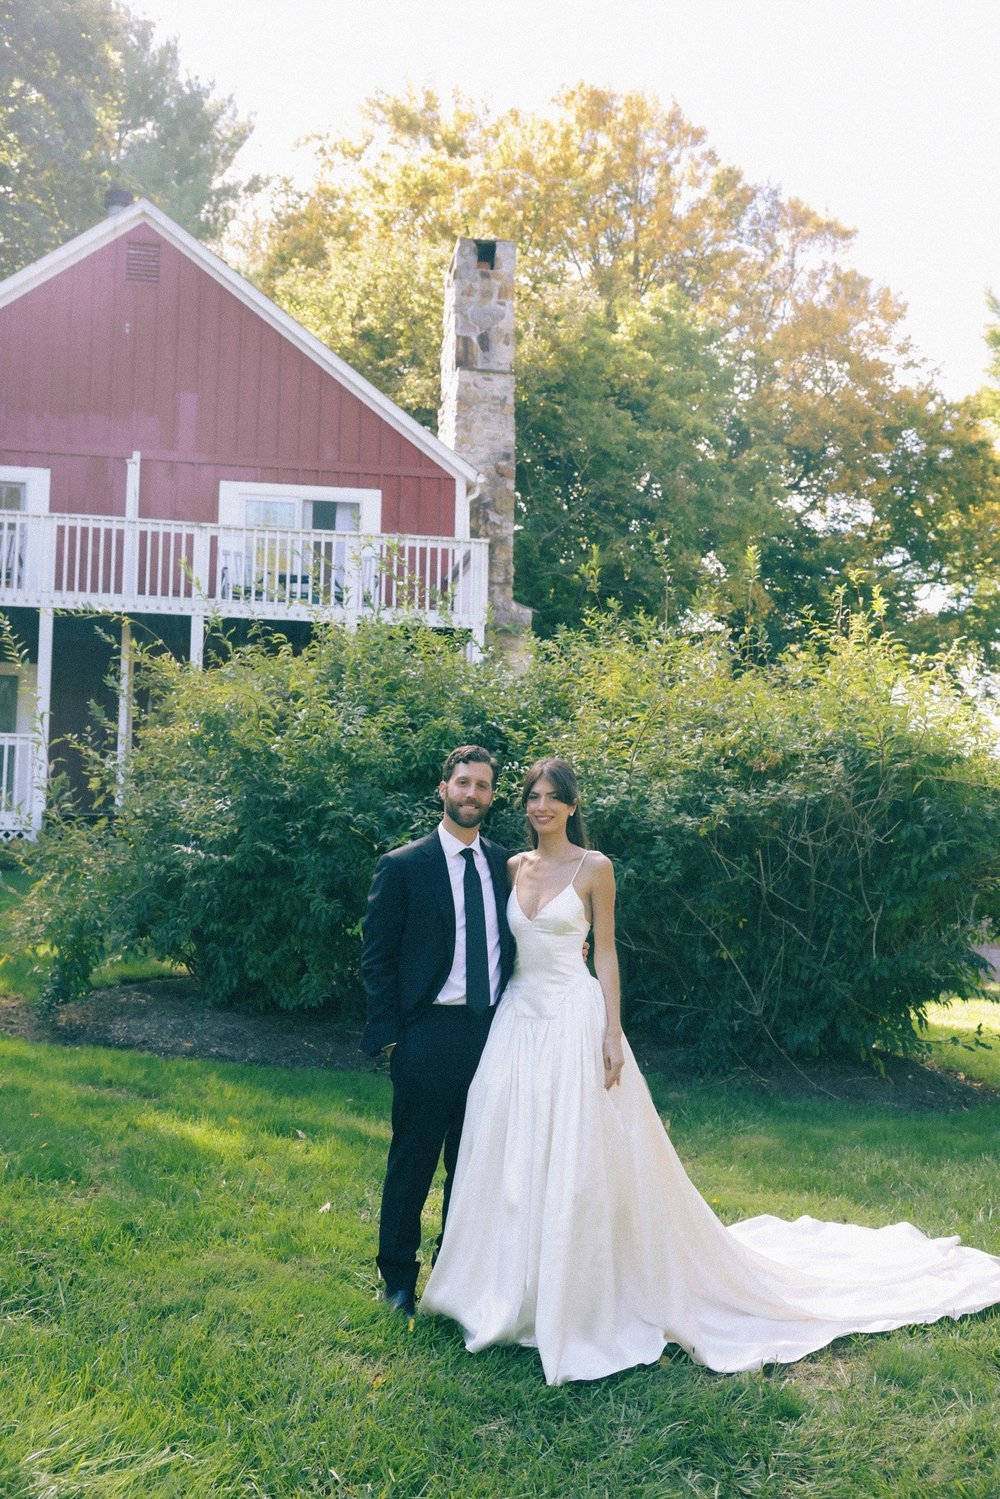 Aliyah - Unique Mermaid Wedding Dress: Satin Wedding Gown Customized to the Bride's Request